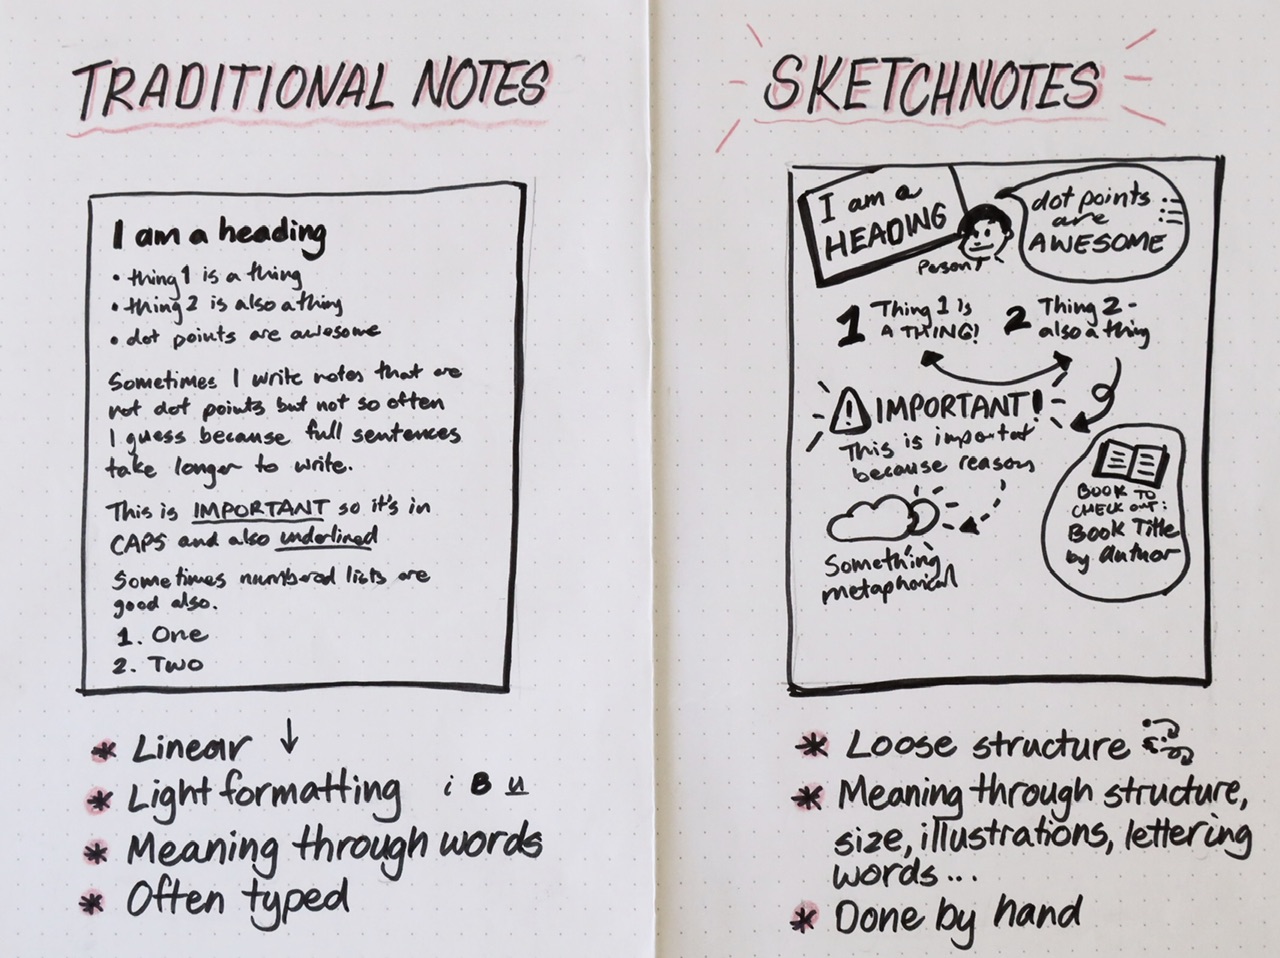 IMG_4496.jpeg|examples of traditional notes on the left, and sketchnotes on the right